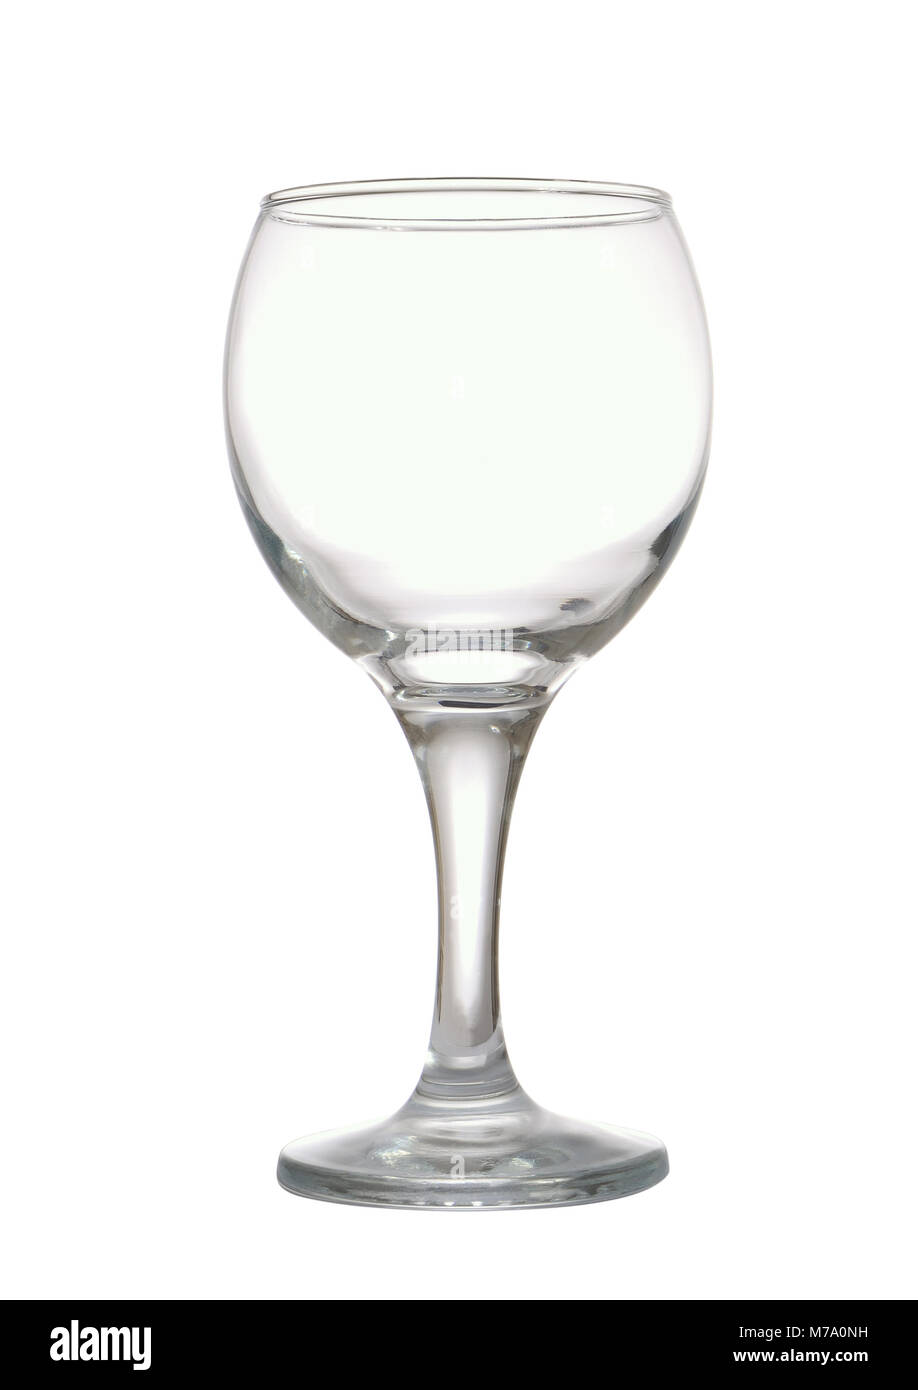 https://c8.alamy.com/comp/M7A0NH/empty-glass-for-red-wine-isolated-on-white-M7A0NH.jpg